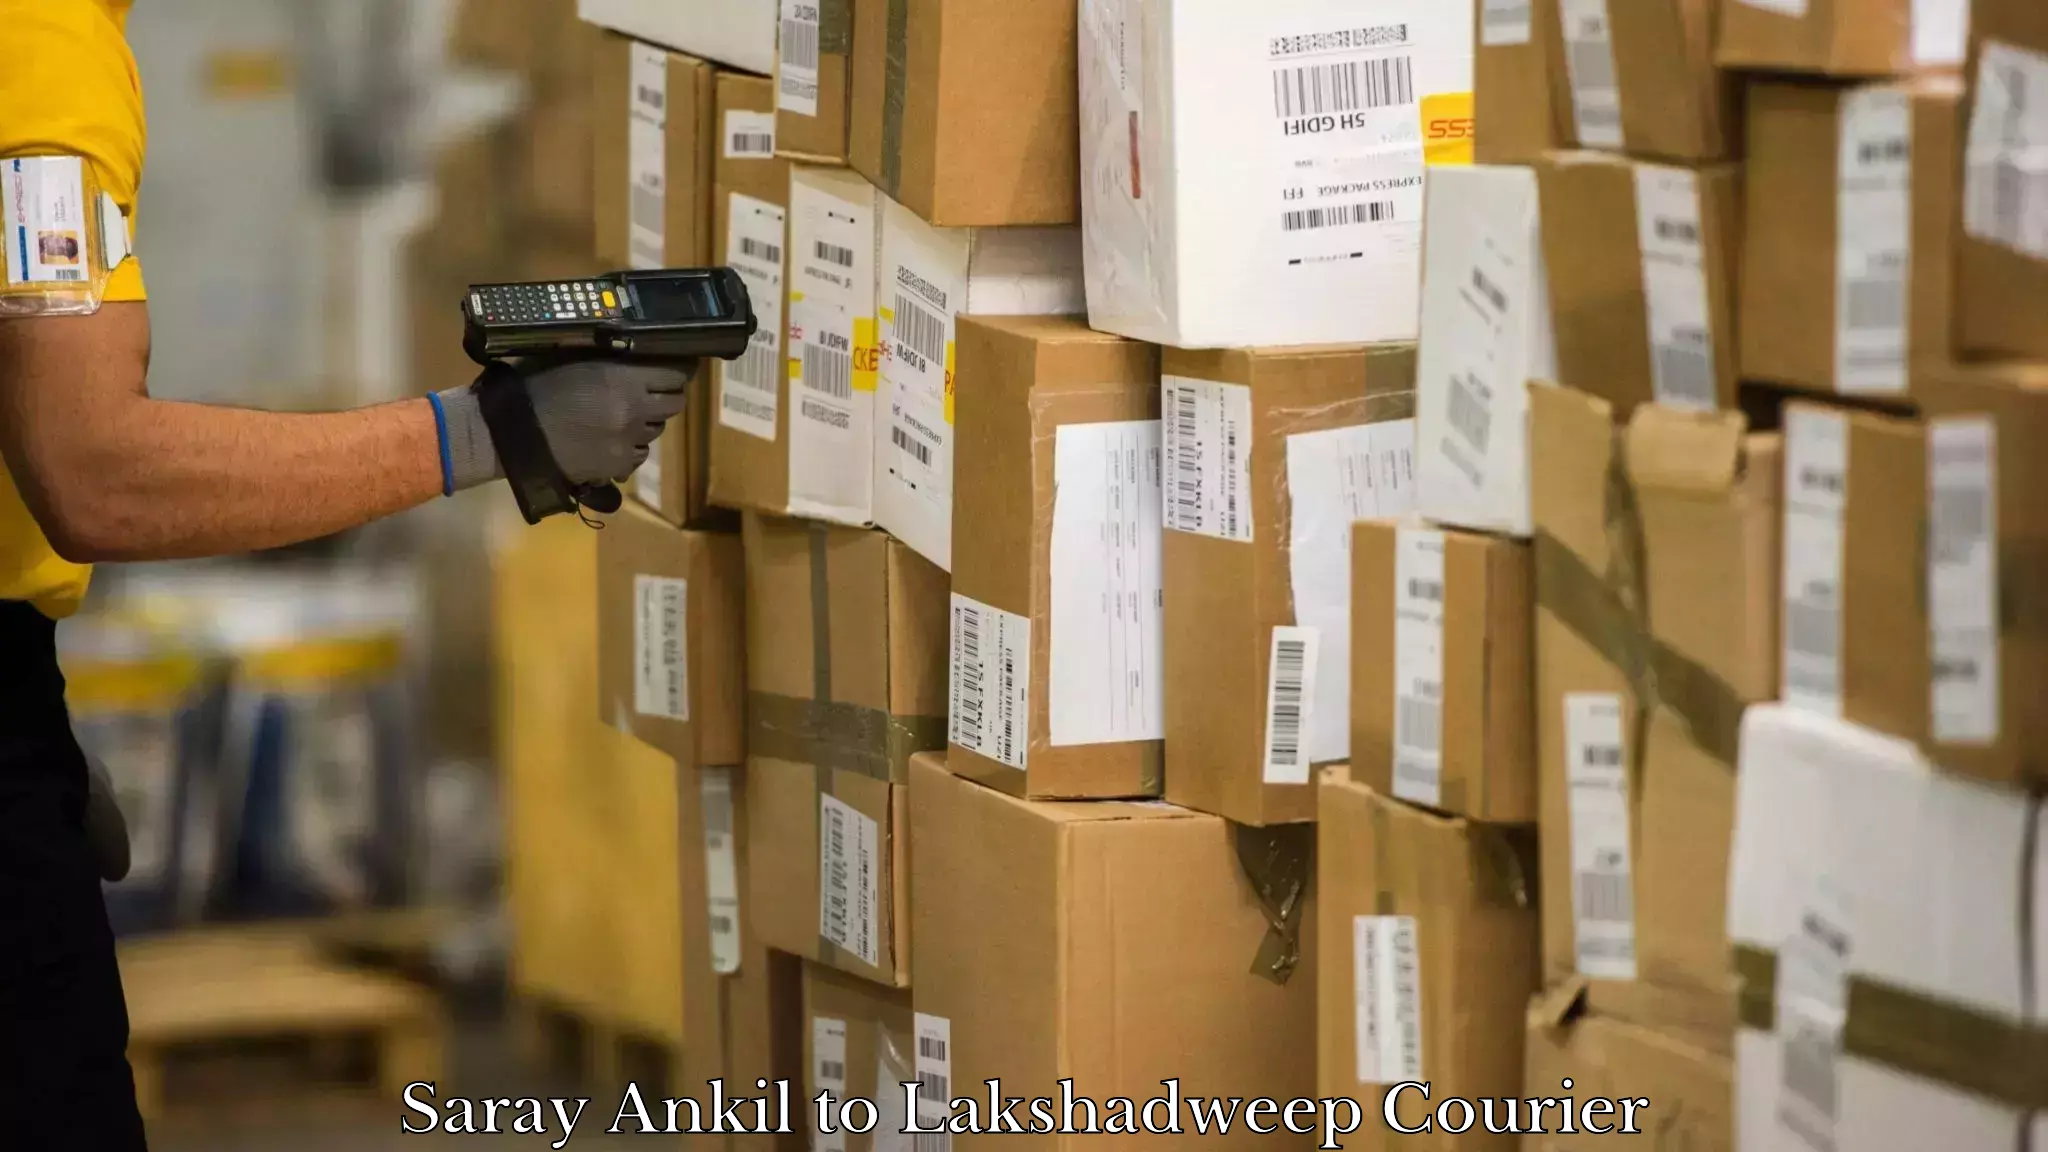 Special handling courier Saray Ankil to Lakshadweep